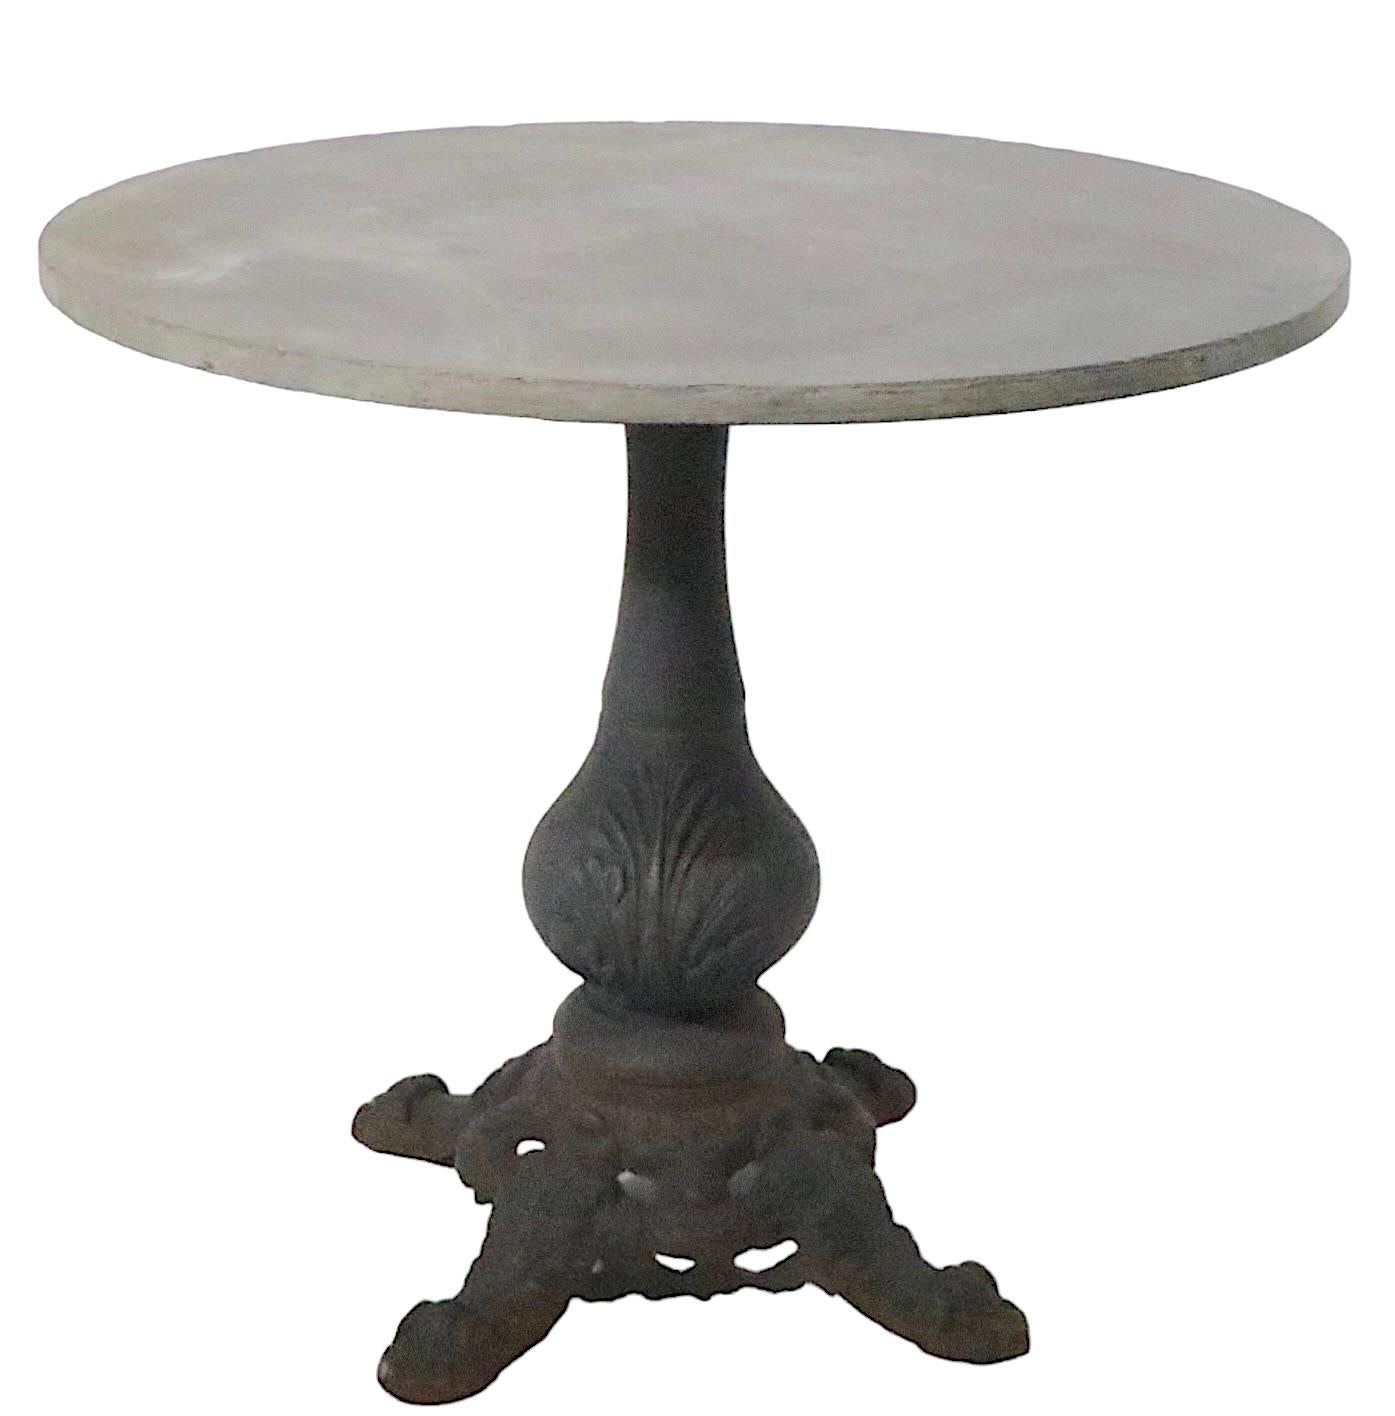 Granite Top Cast Iron Base French Style Cafe Bistro Garden Table c 1920 - 1950s For Sale 2